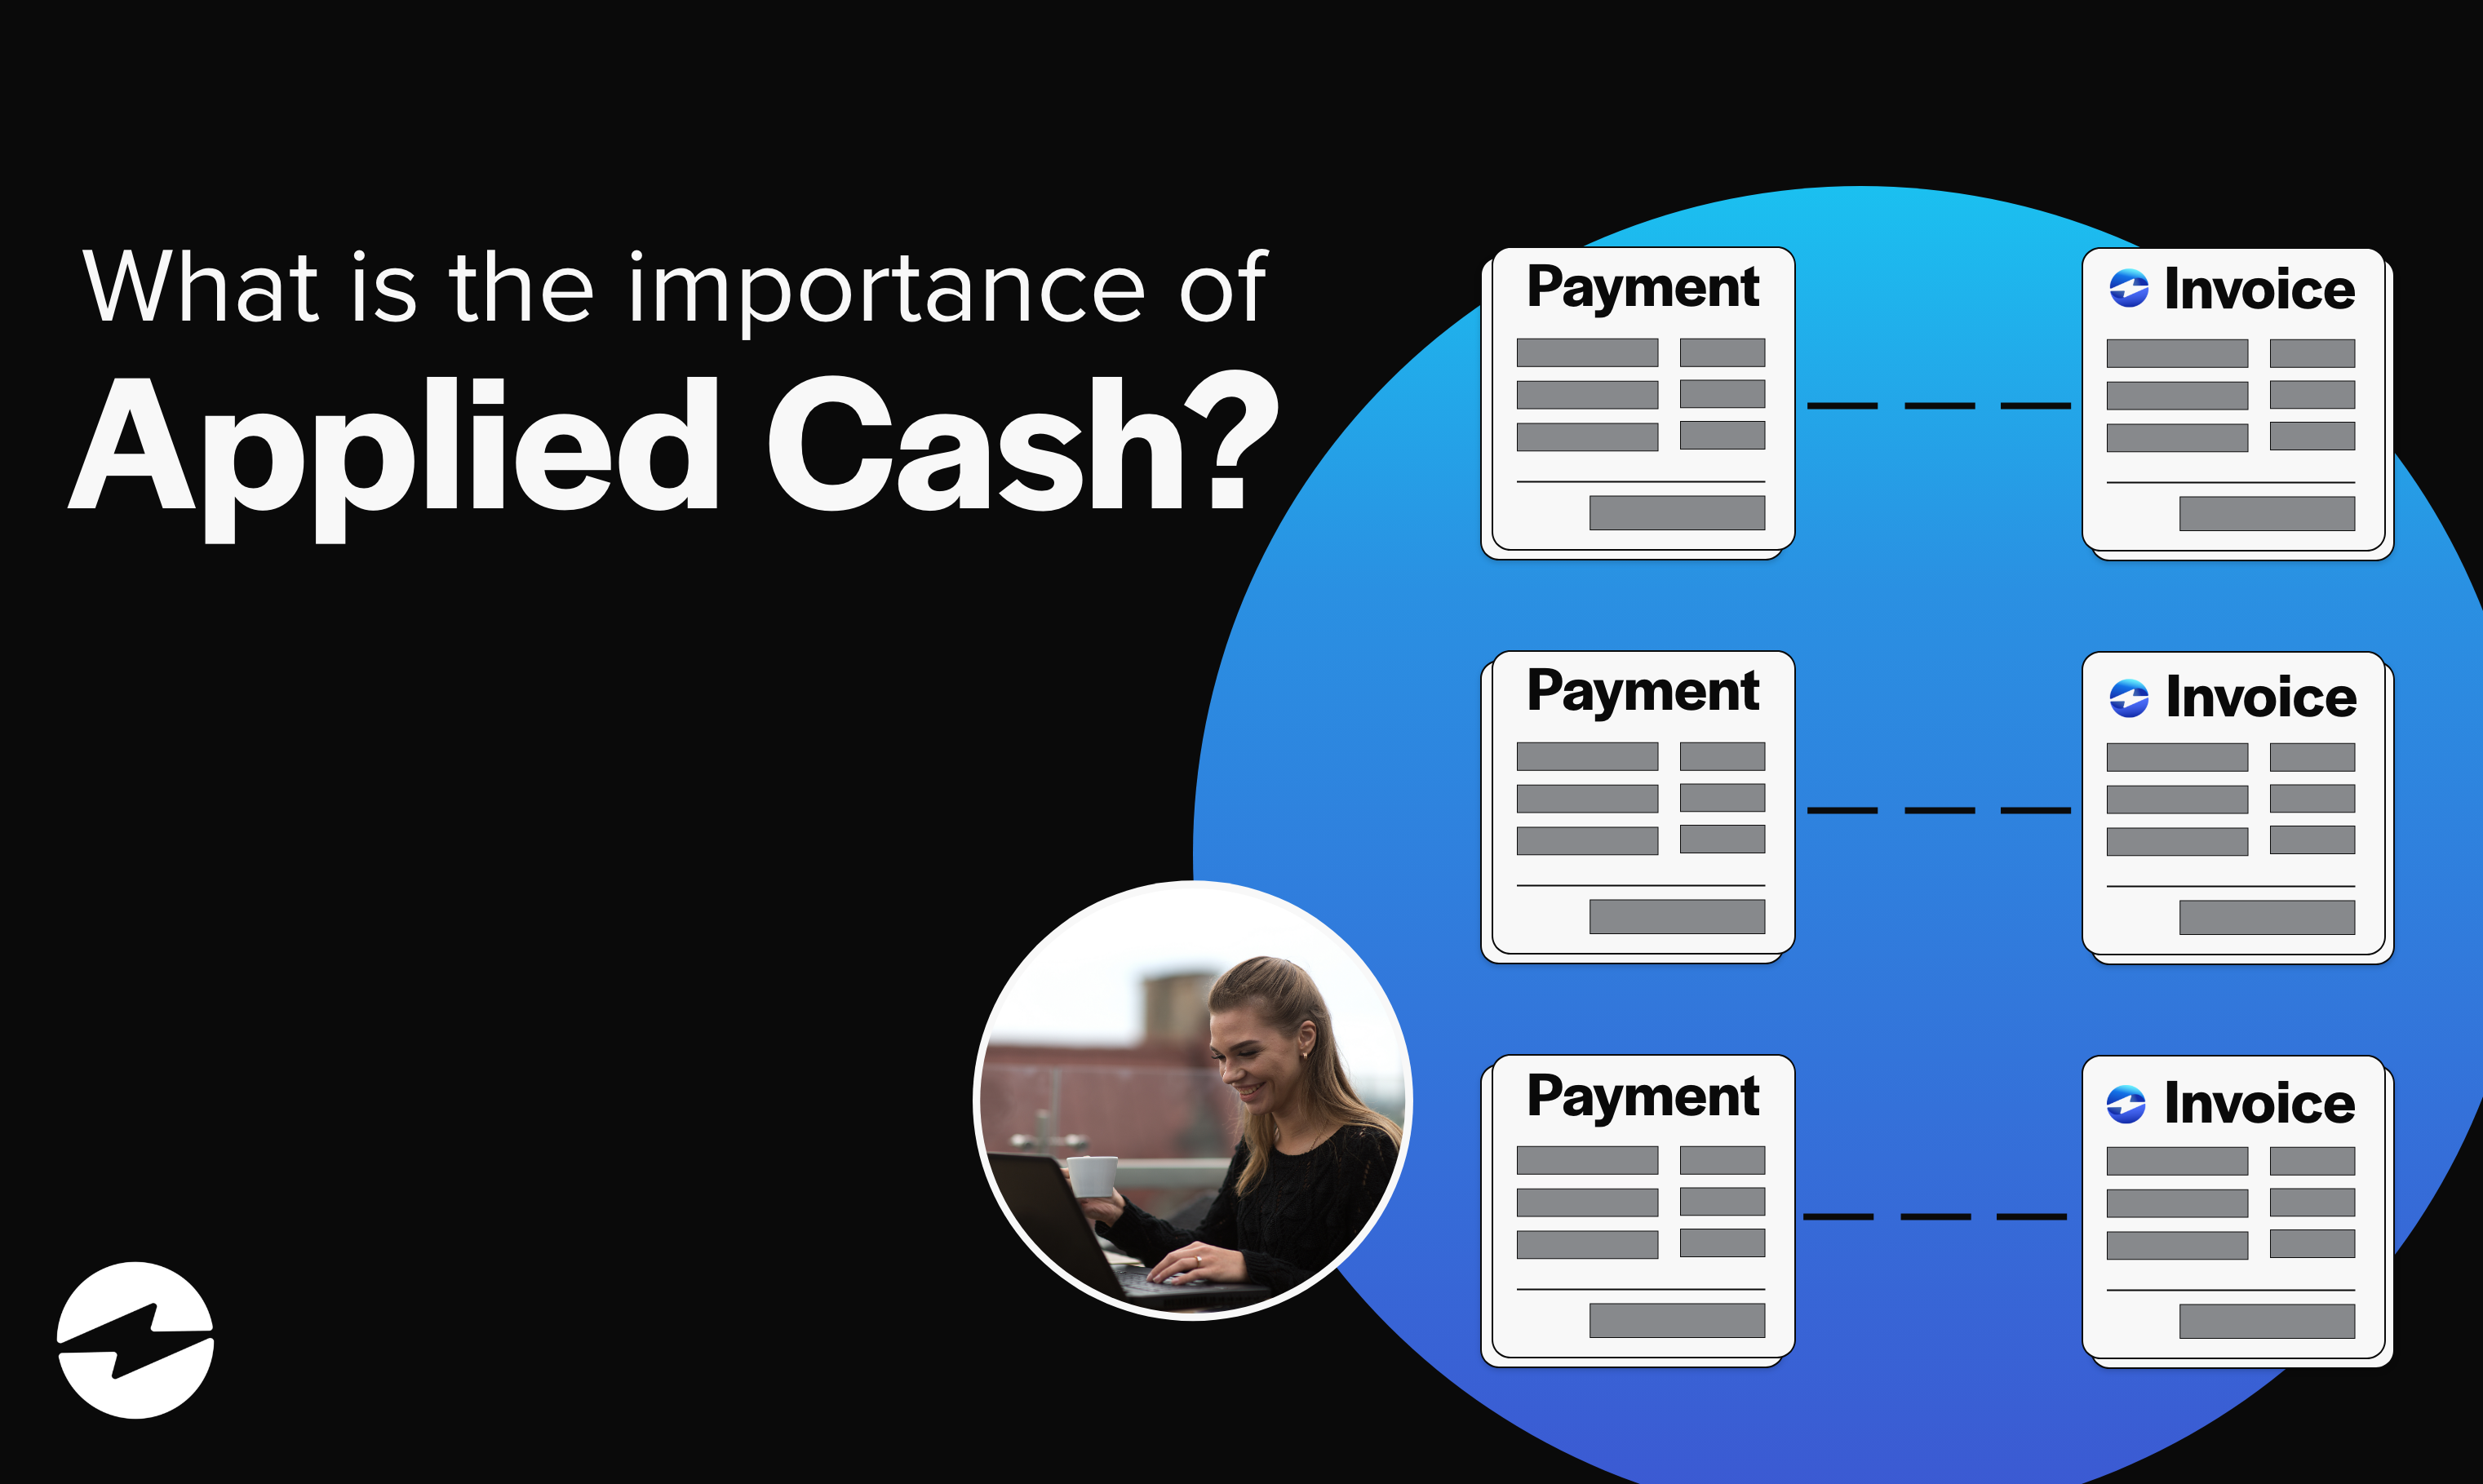 What is the importance of applied cash